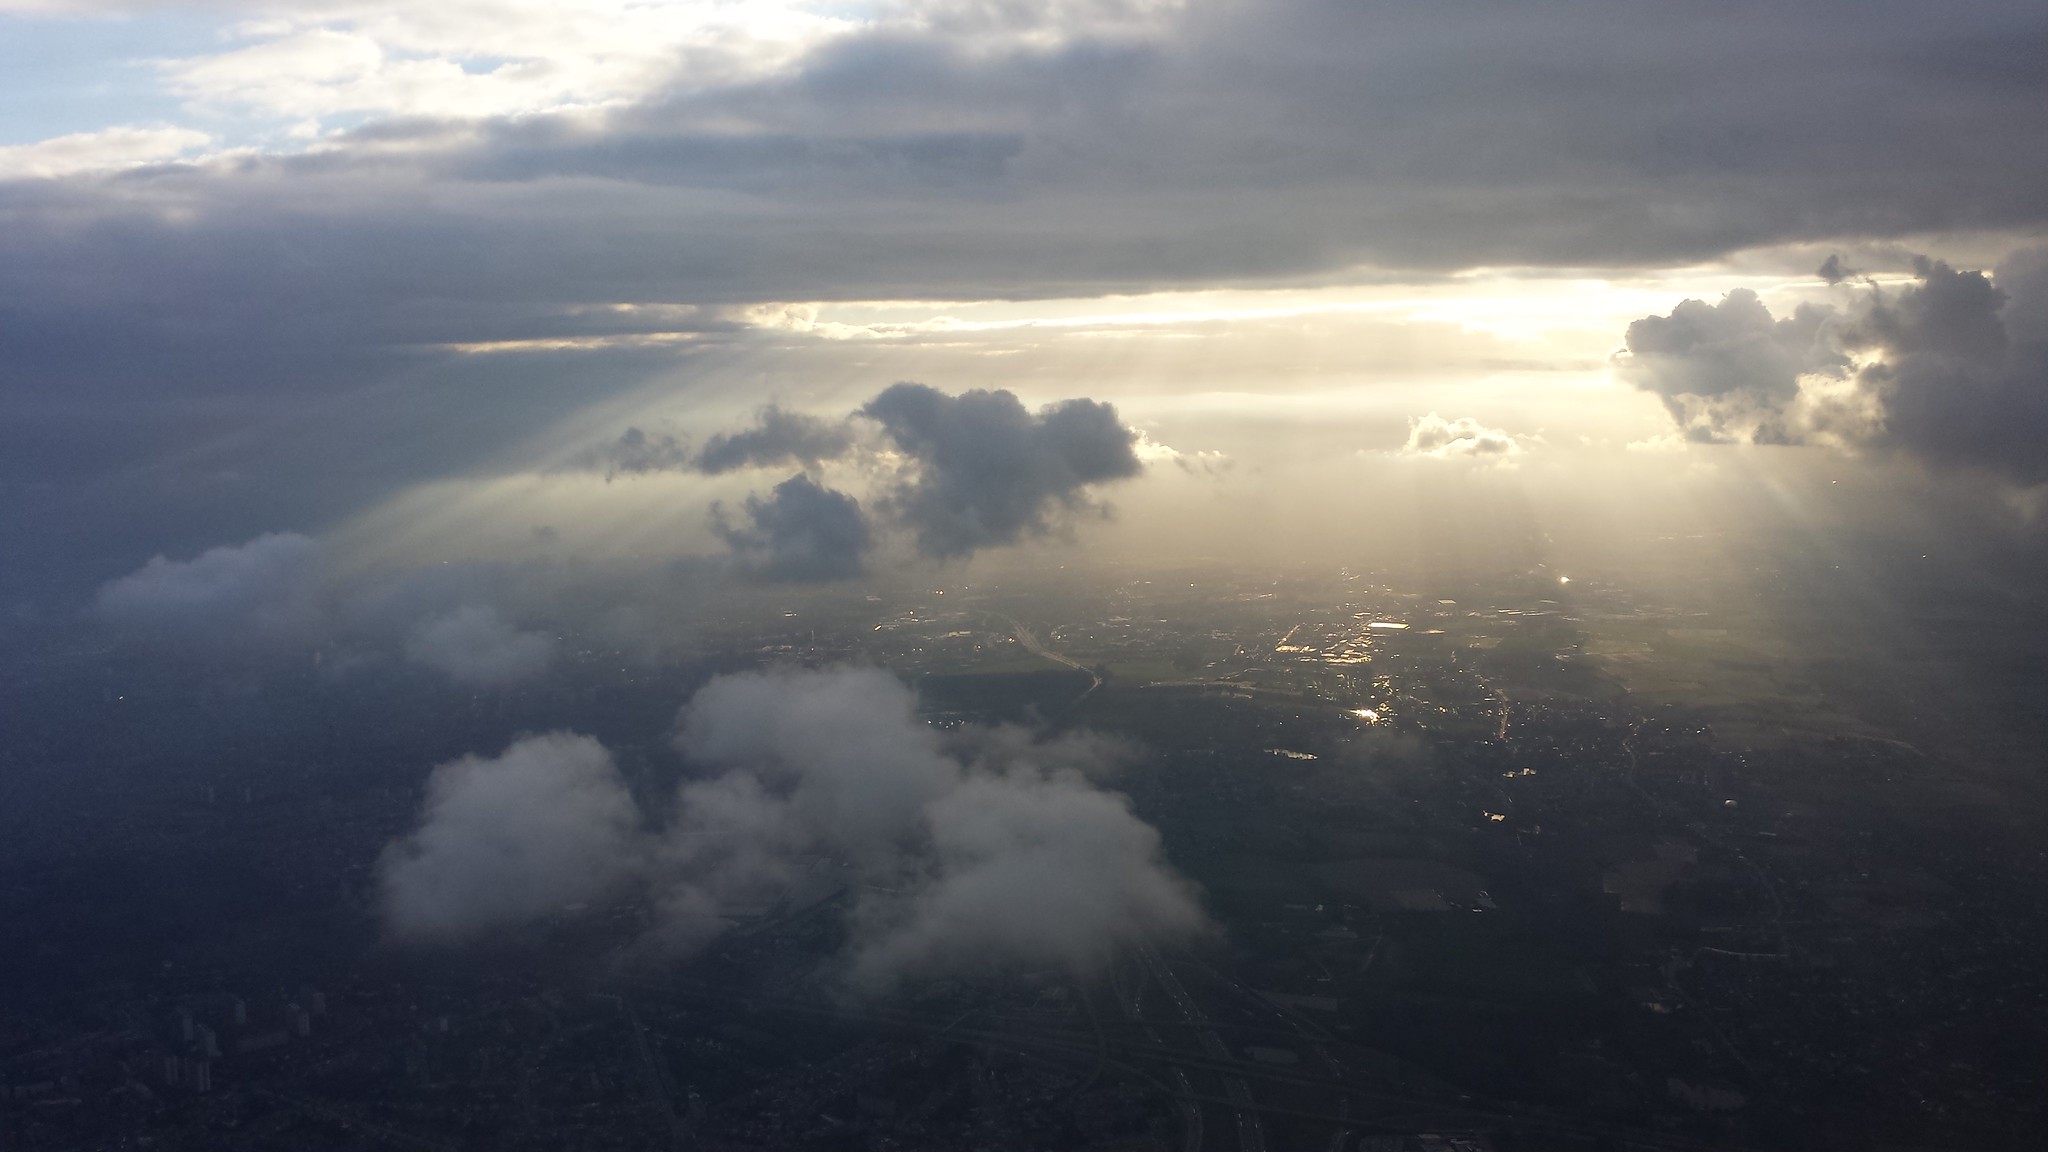 Dramatic views after taking off from Brussels airport